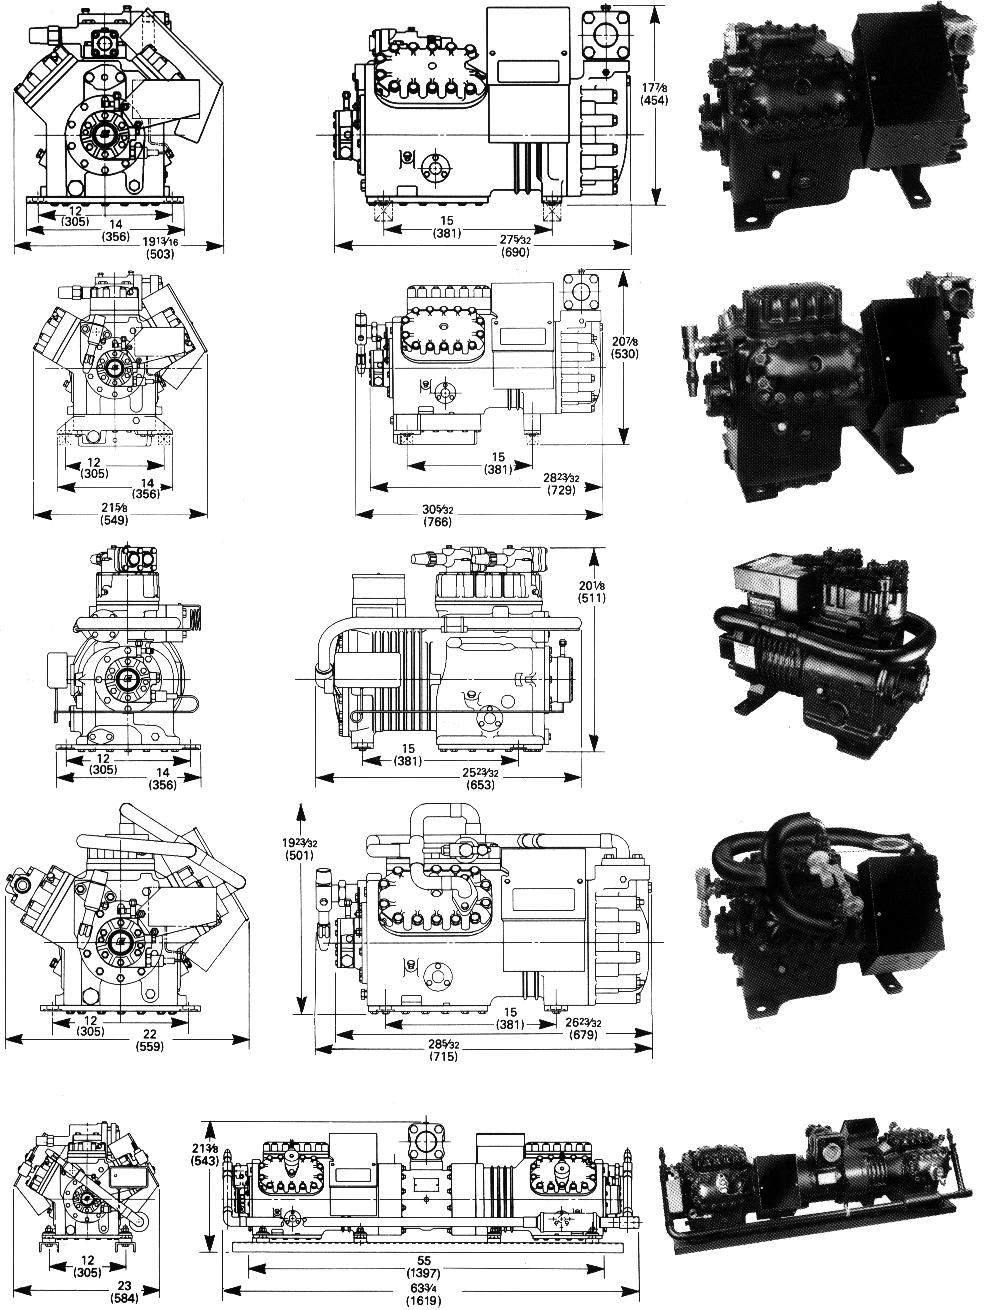 CONVENTIONAL COMPRESSORS DIMENSIONS AND PHOTOGRAPHS 4R F A M I L Y Model 4RJ1-3000 Shown 6R F A M I L Y Model 6RJ1-4000 Shown TWO- STAGE 9T F A M I